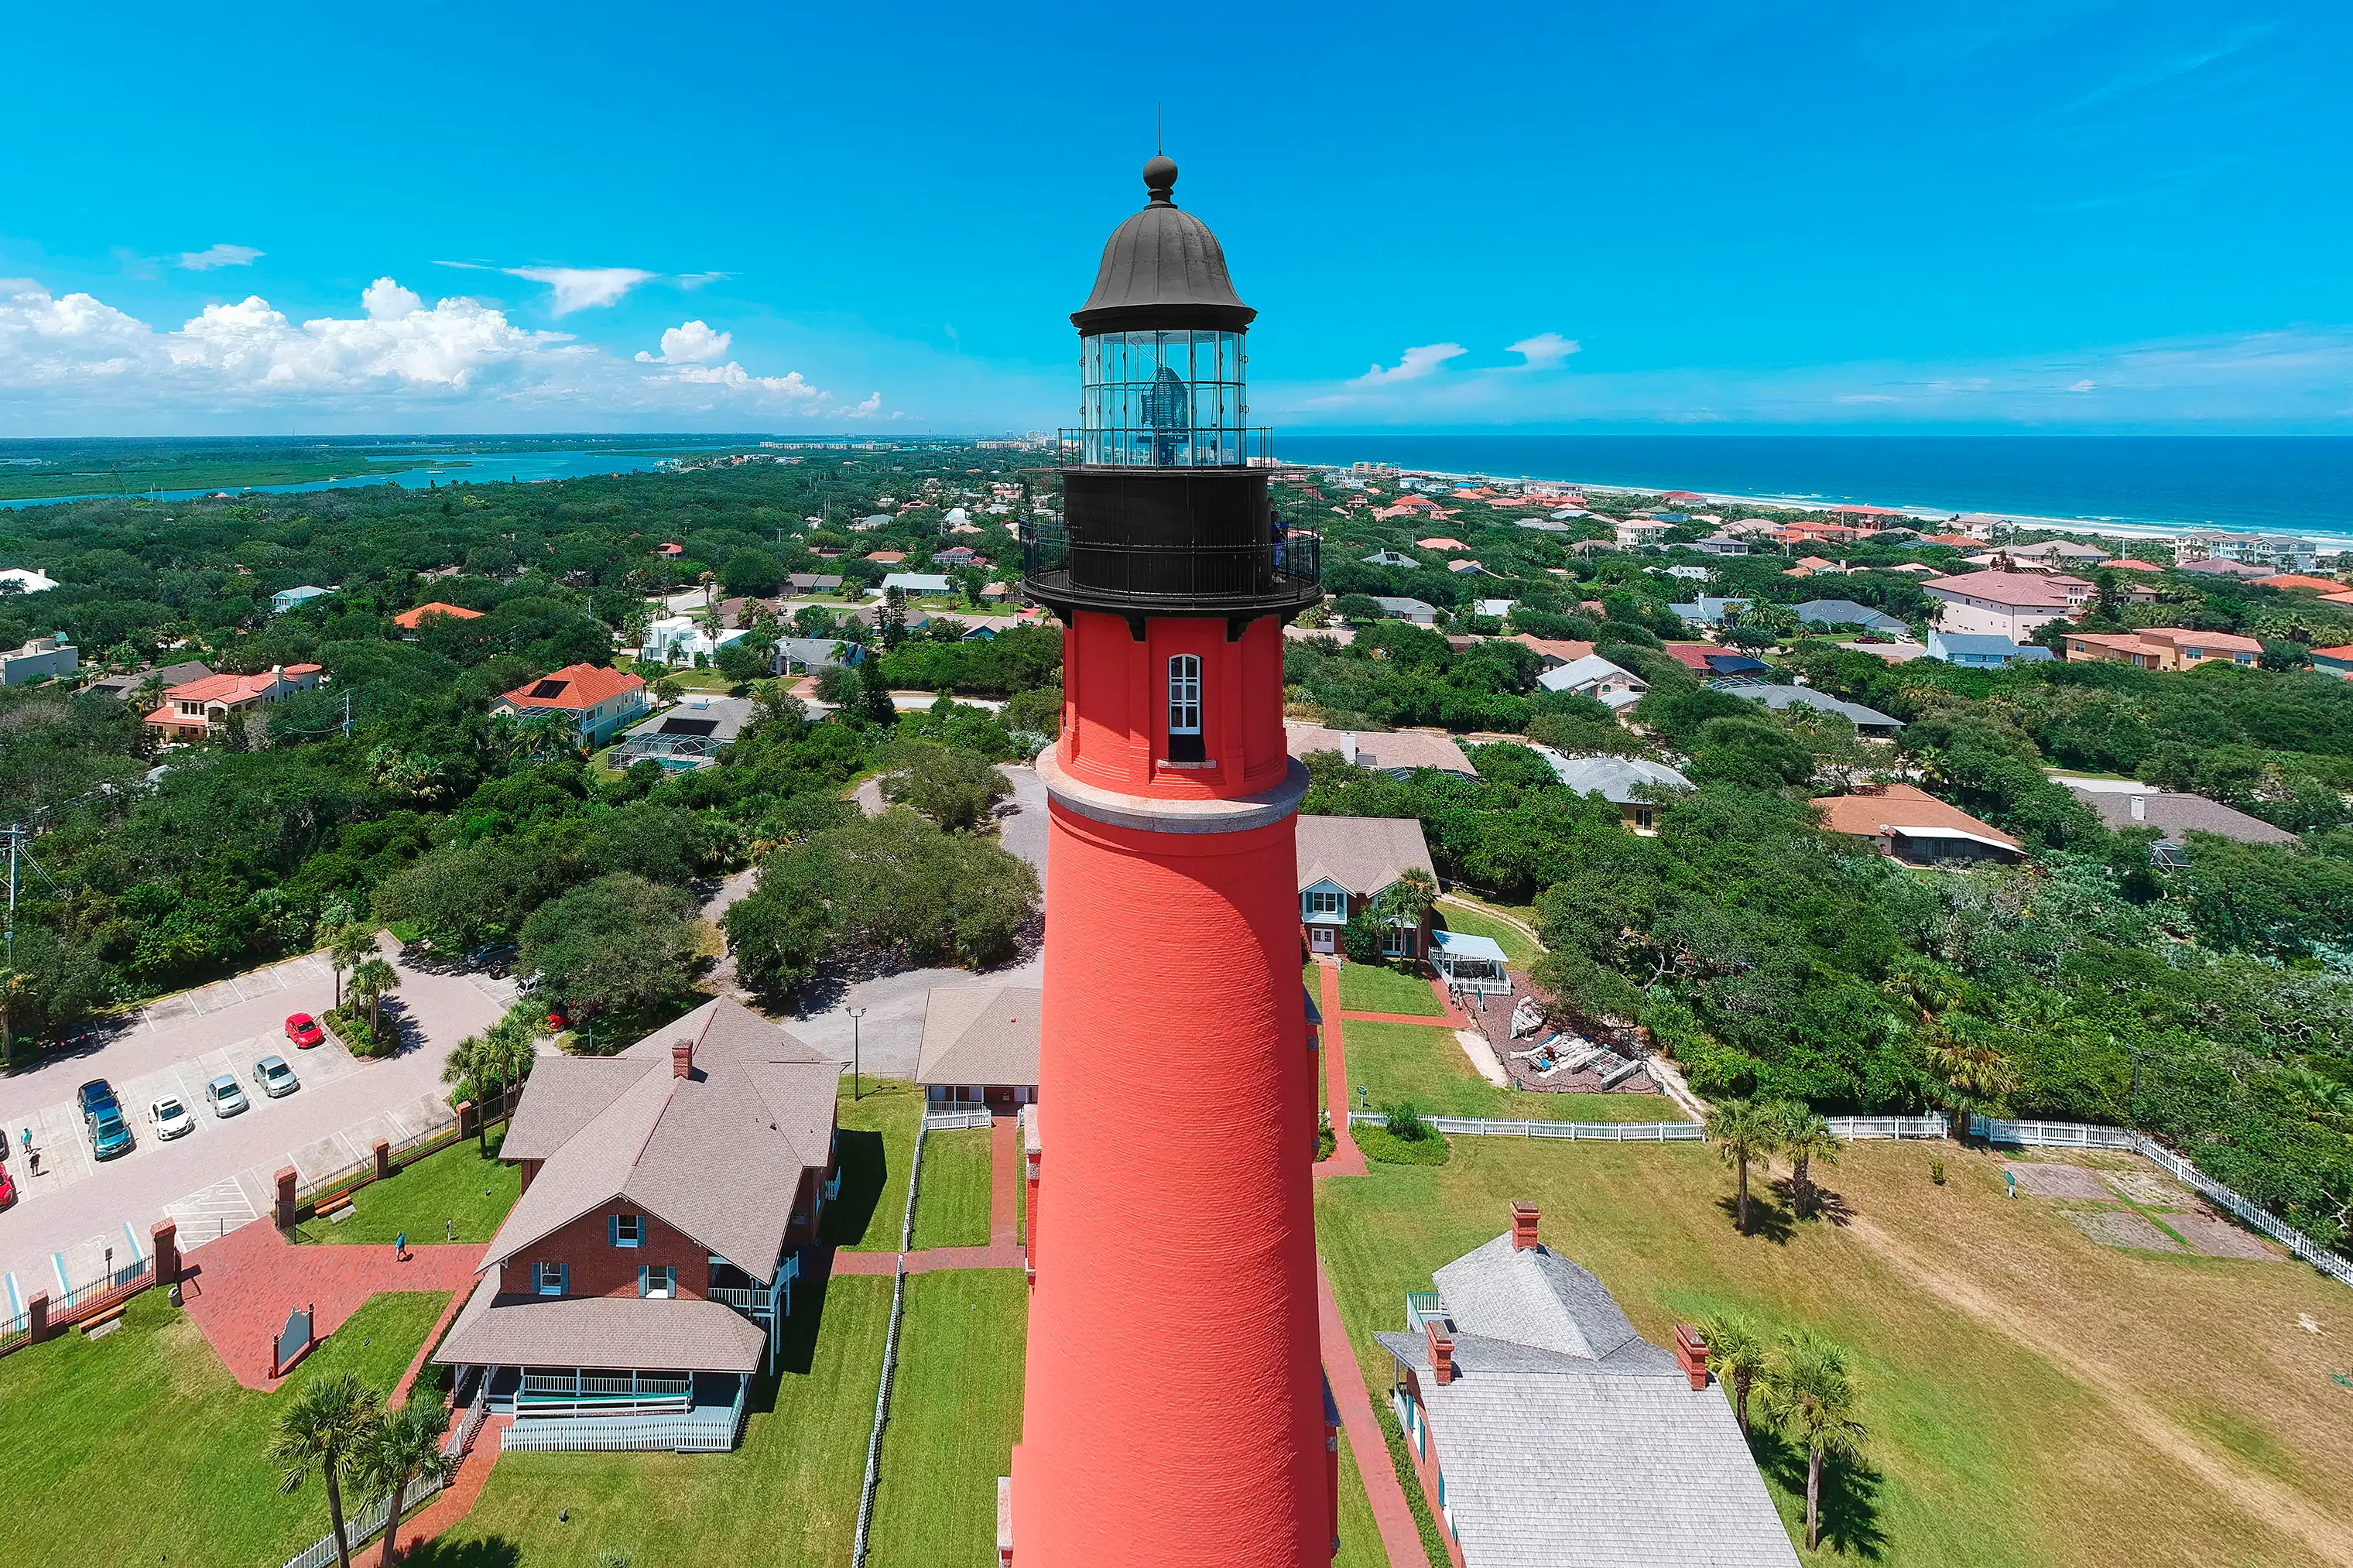 The well-preserved Ponce de Leon Inlet Lighthouse towers above the town.